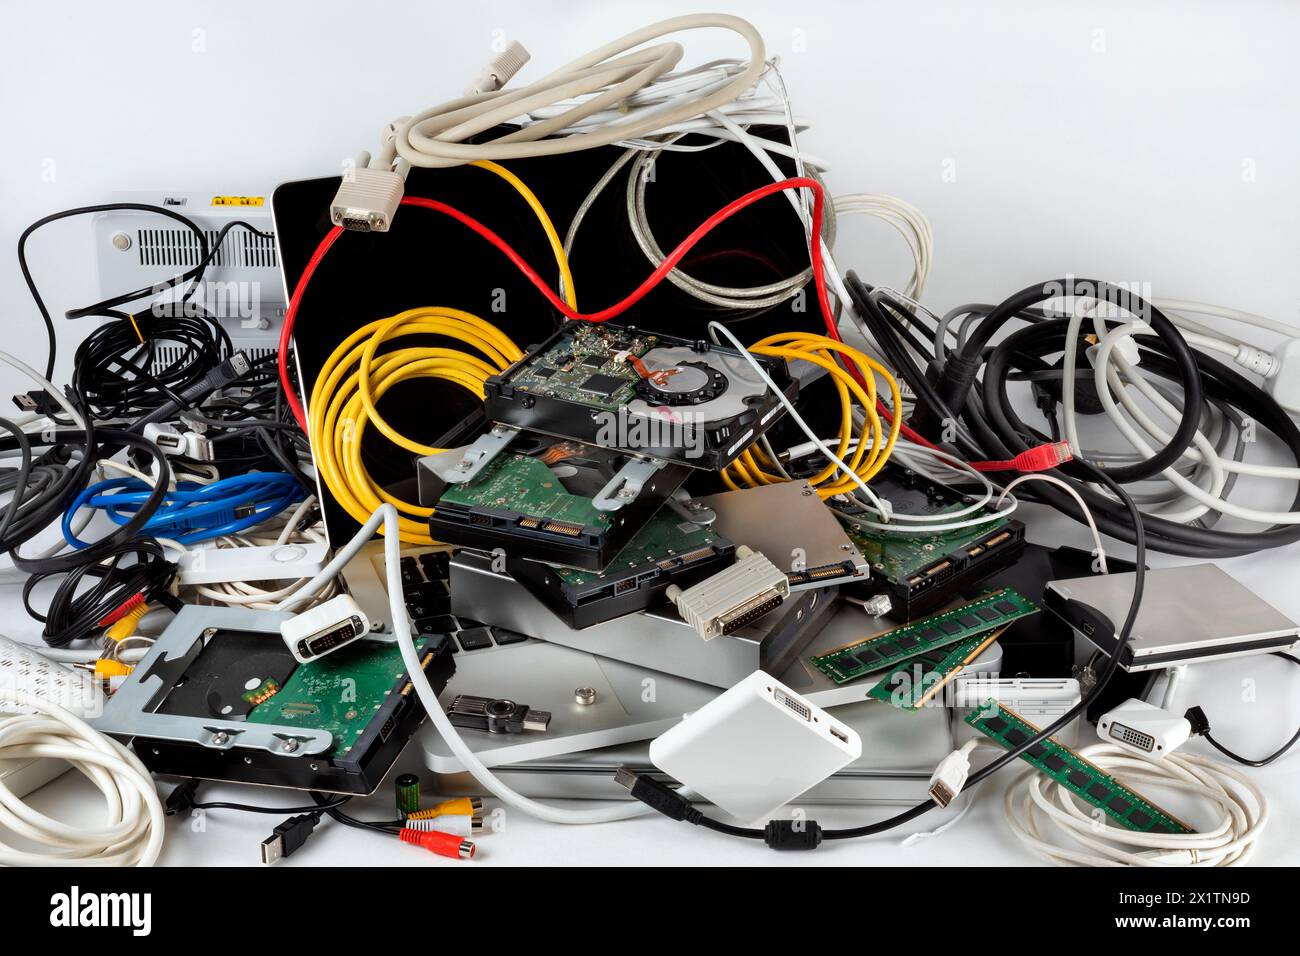 Electronic Waste - Obsolete Computer Technology for Recycling Stock Photo